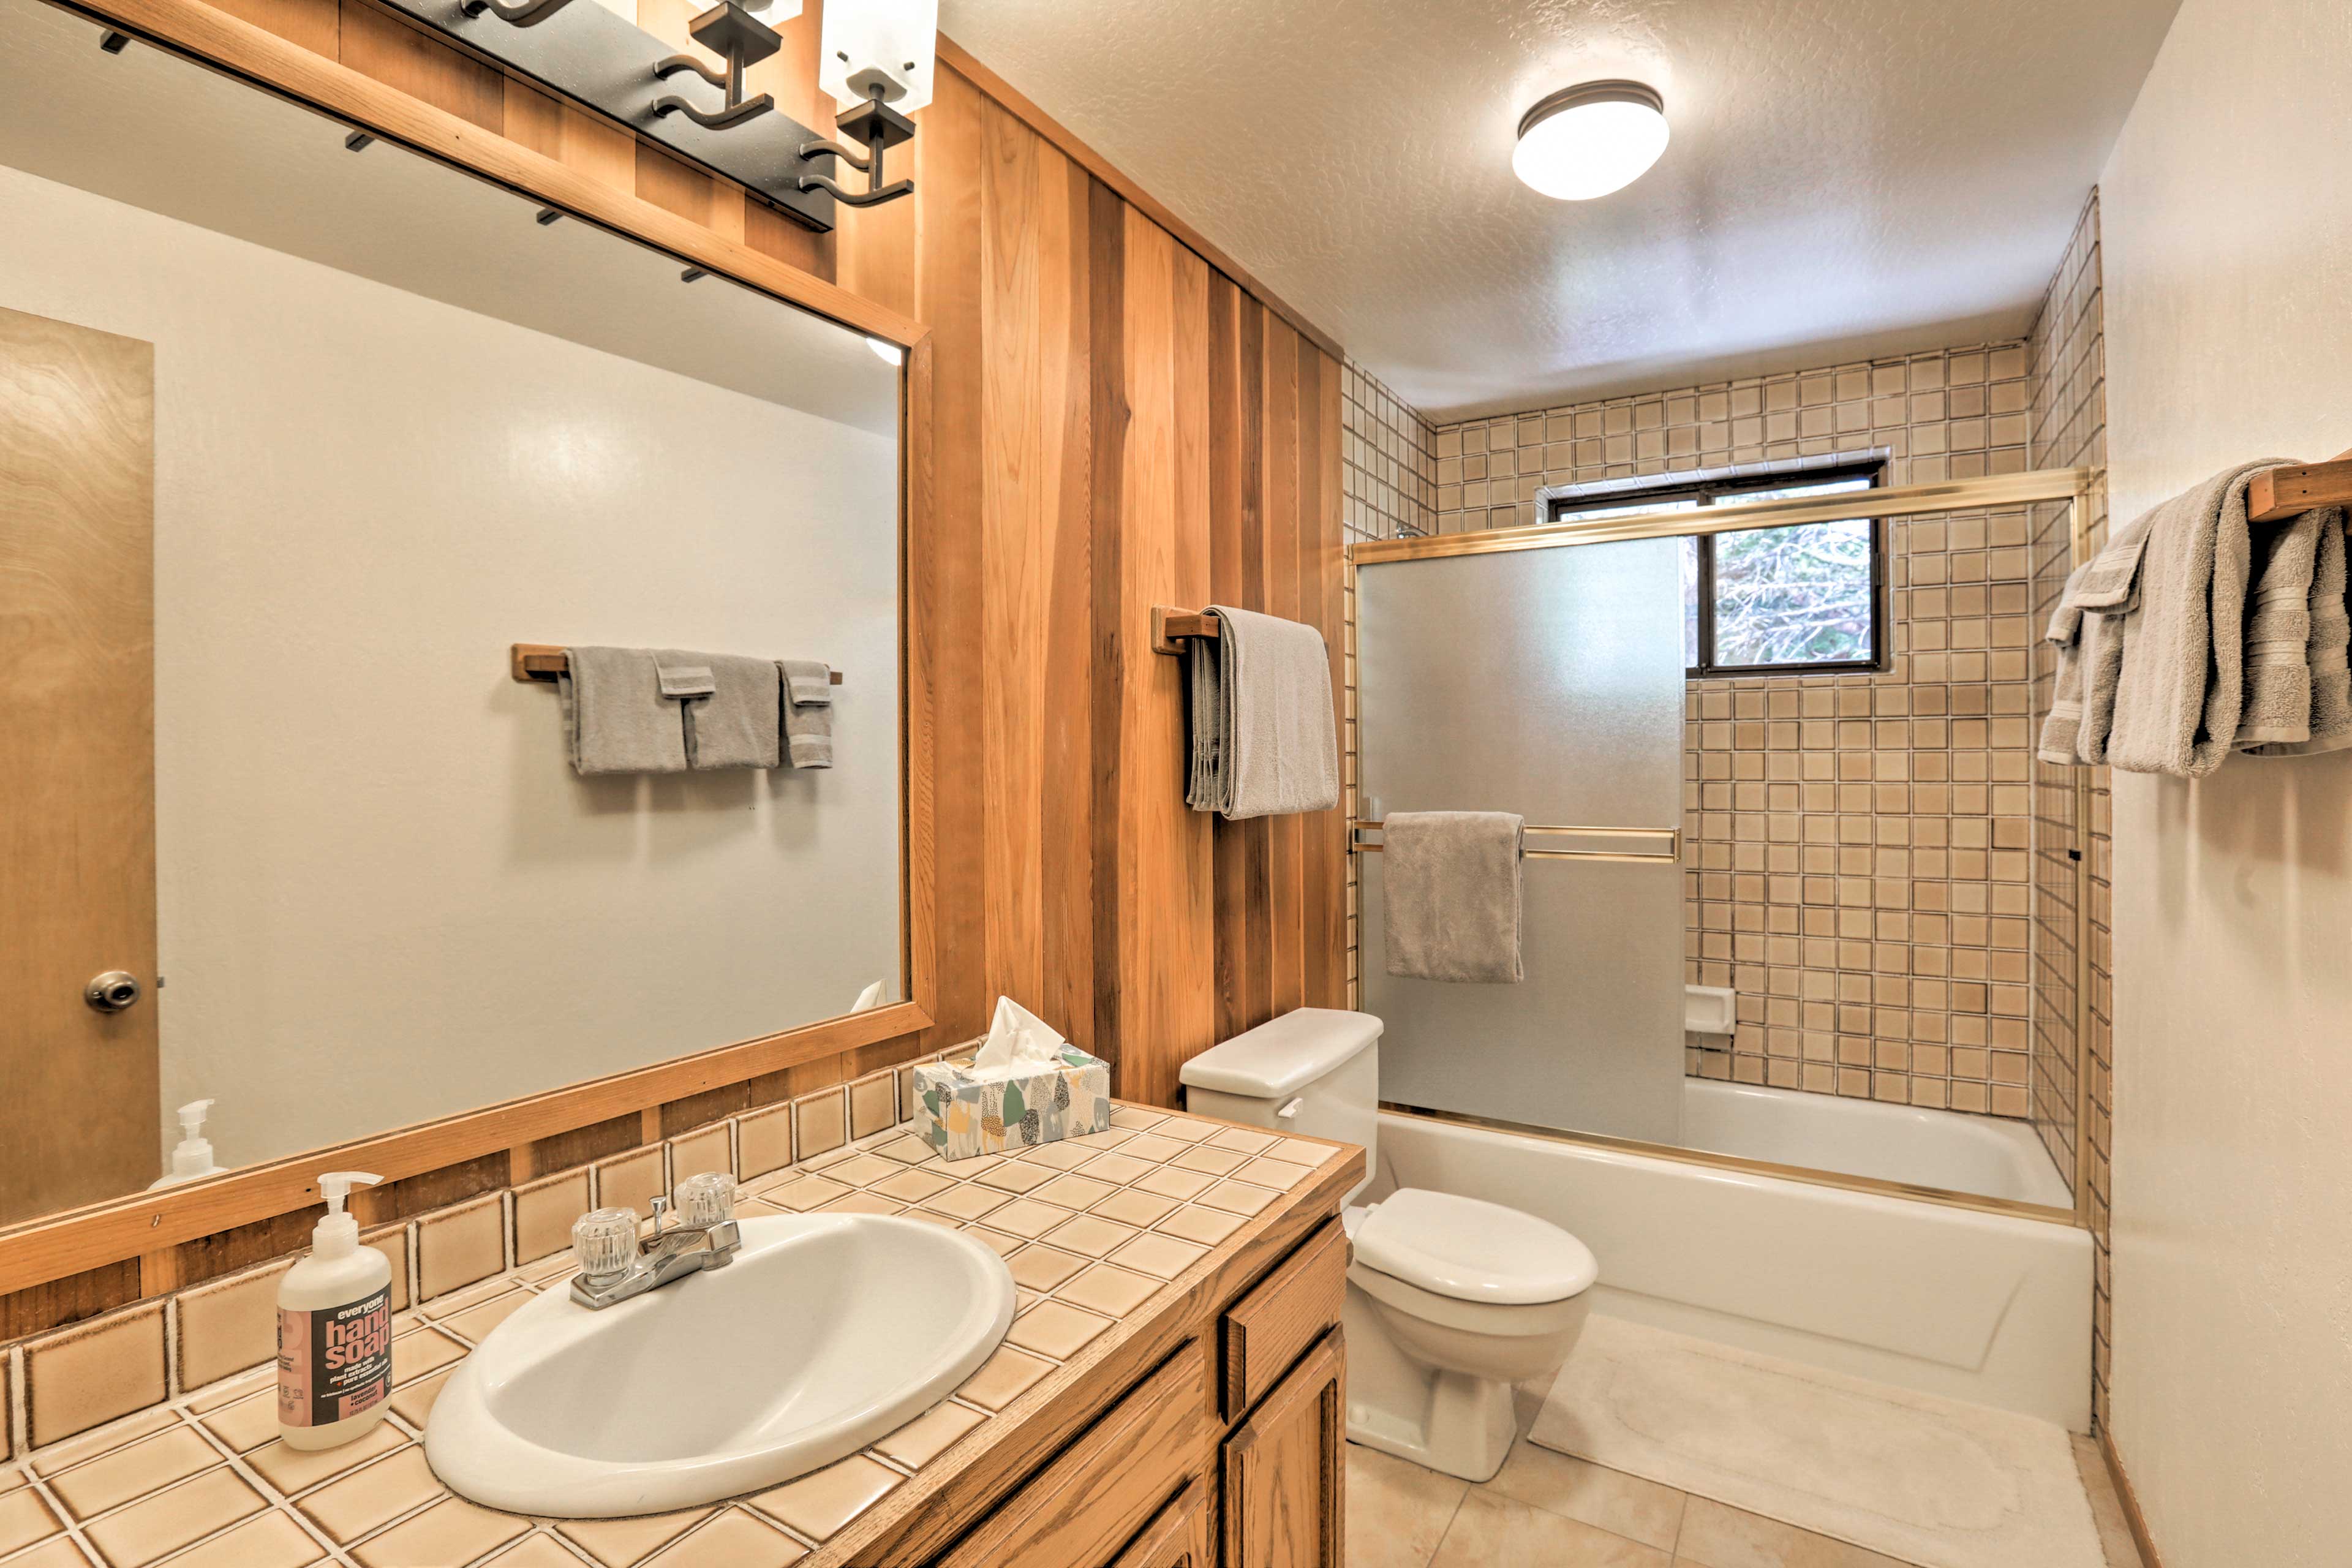 Each of the 3 baths have shower/tub combos.